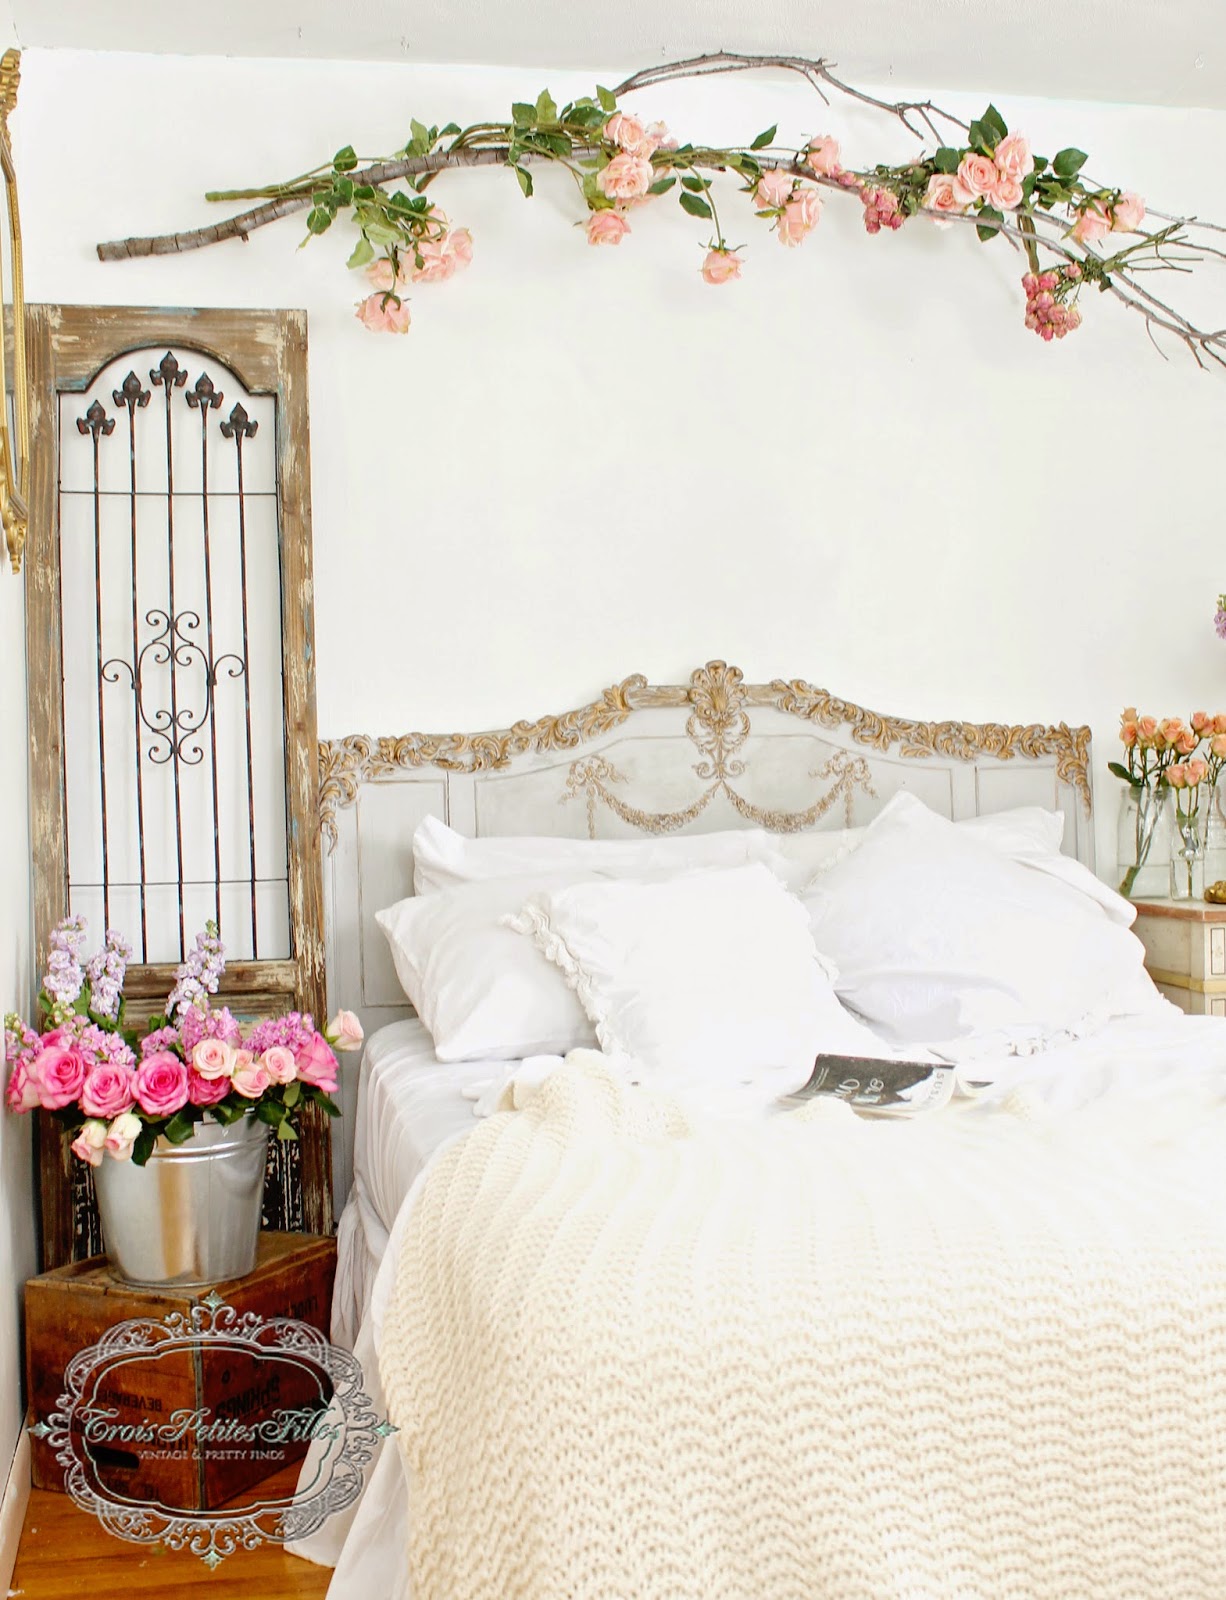 Trois Petites Romantic Bedroom-Treasure Hunt Thursday- From My Front Porch To Yours